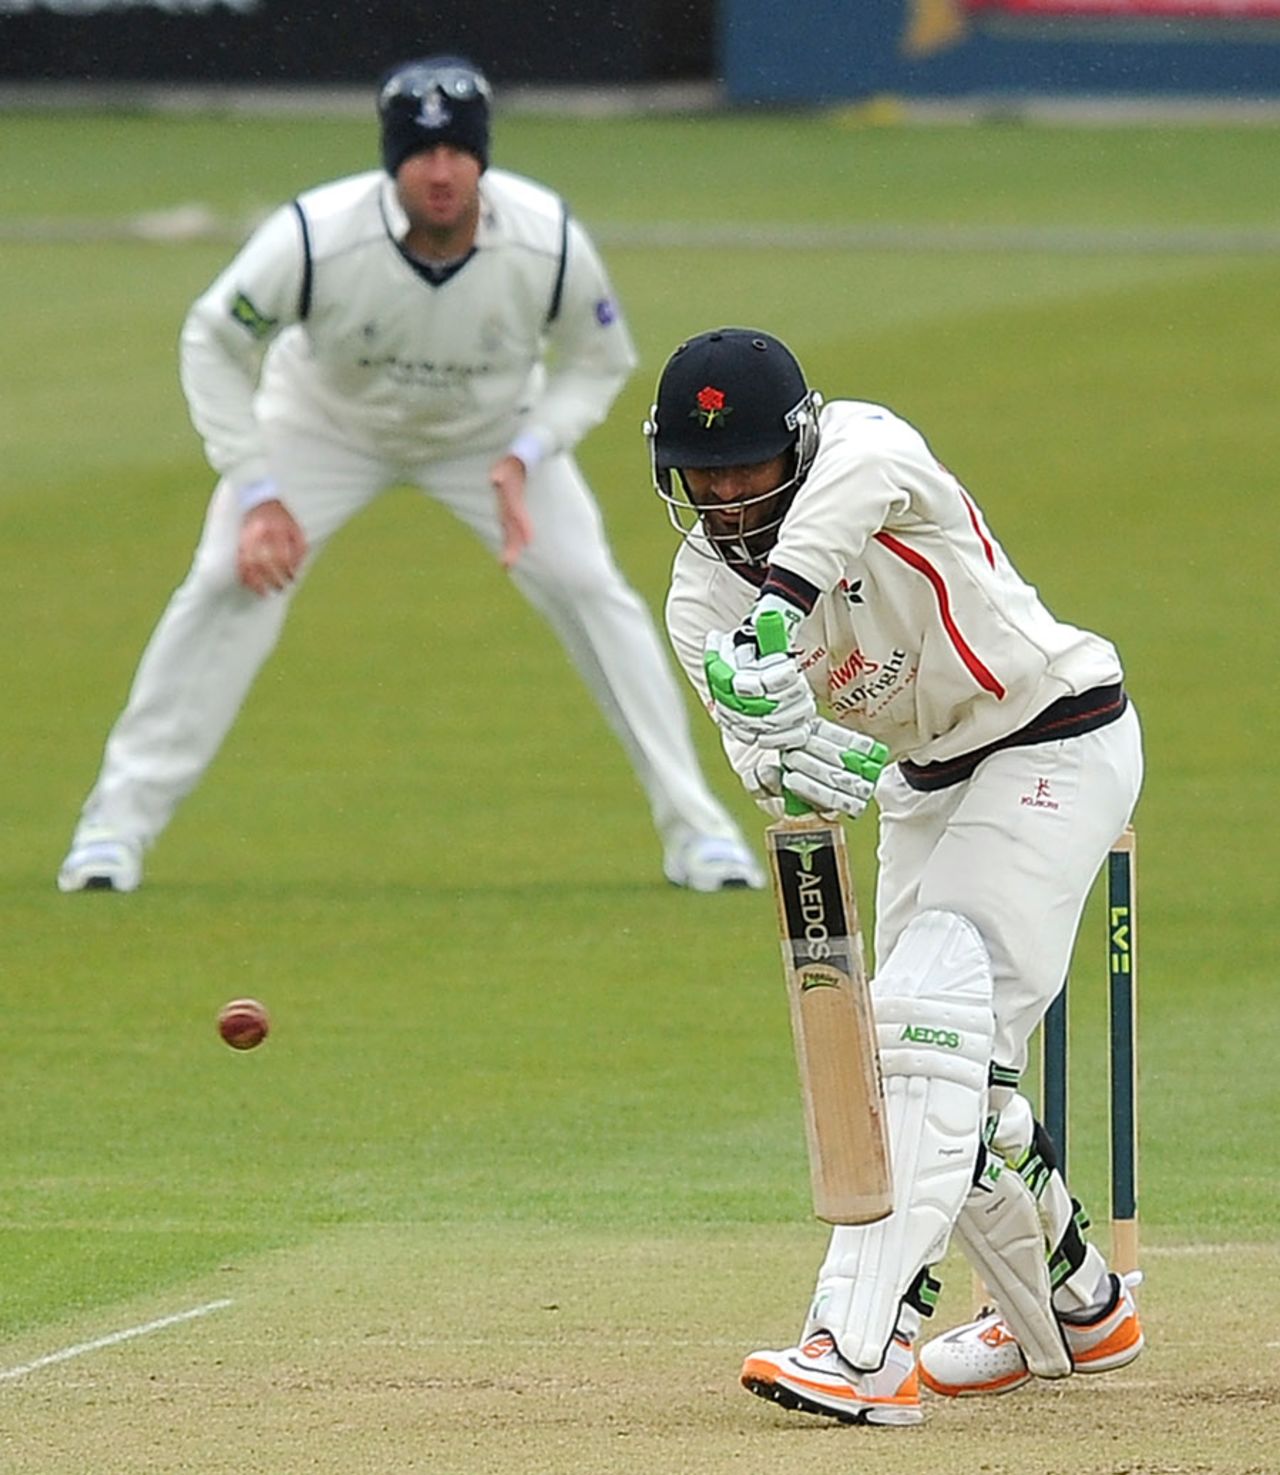 Andrea Agathangelou plays a solid defence en route to a century, Hampshire v Lancashire, County Championship, Divison Two, Ageas Bowl, 2nd day, May 24, 2013